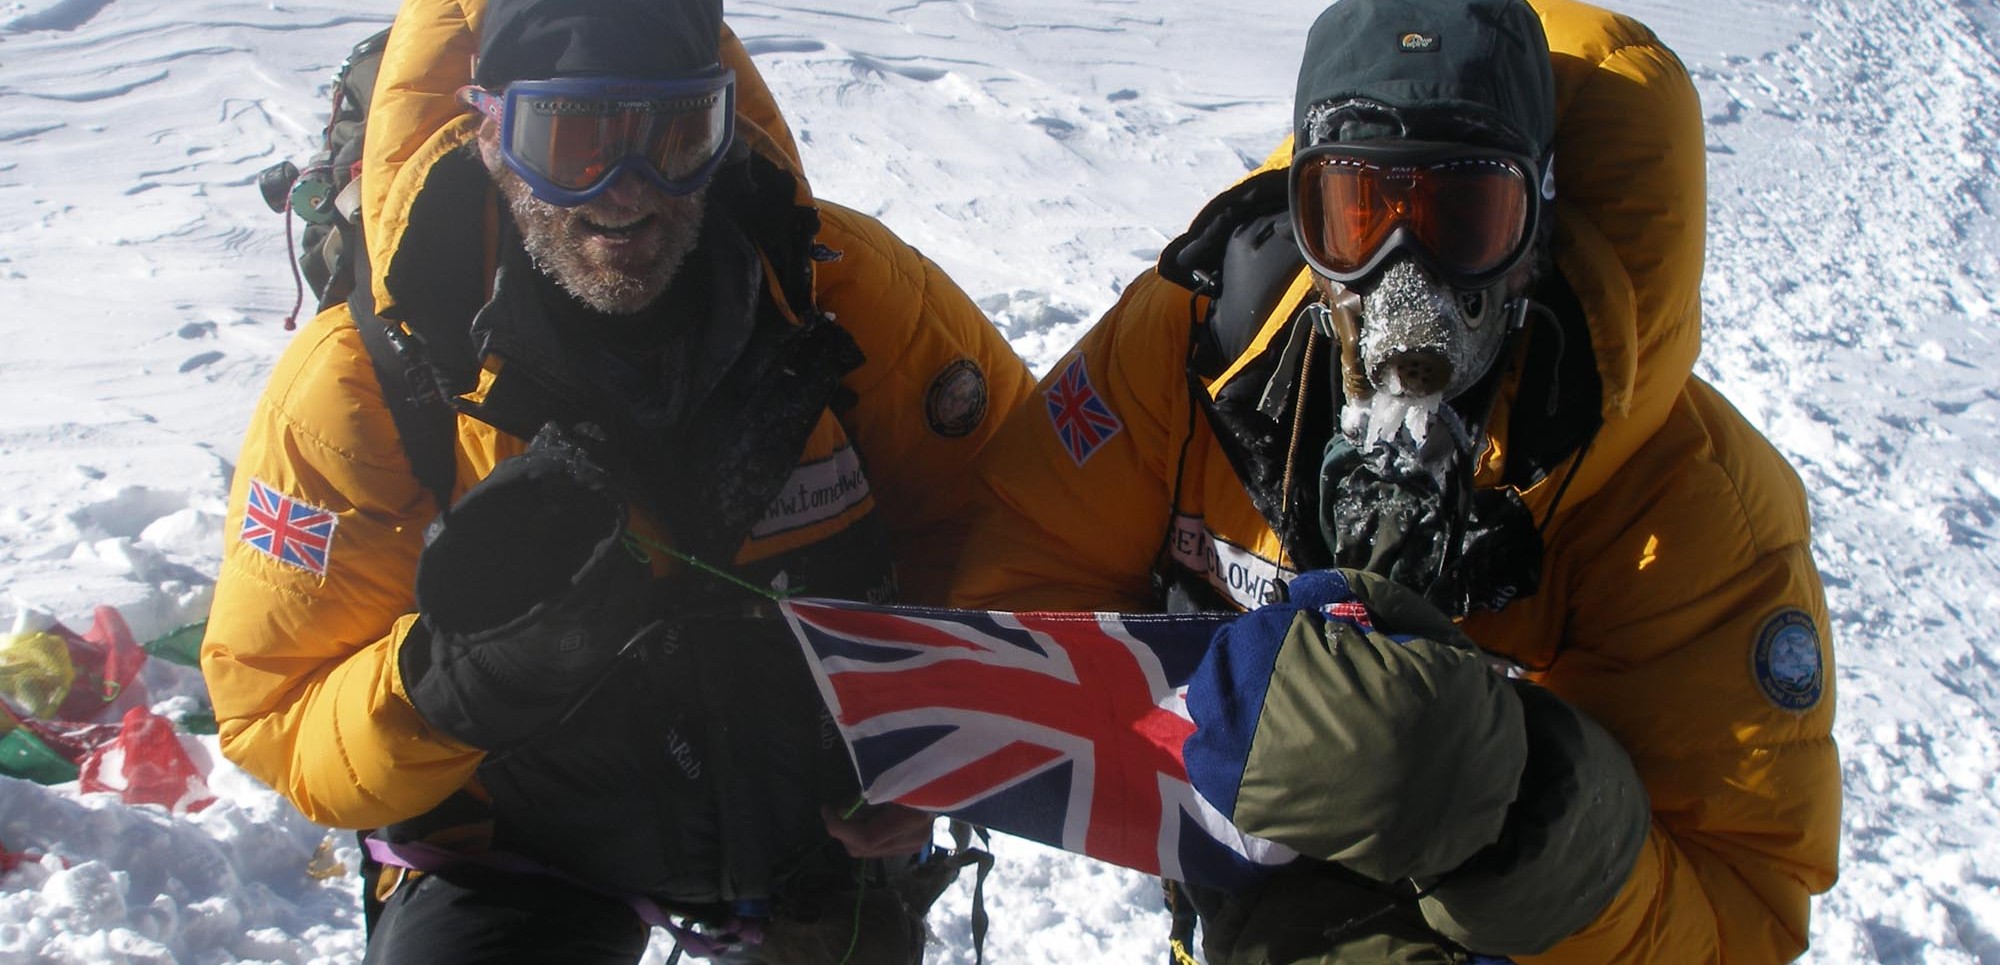 Tom and Ben Clowes on the top of Everest (18th May, 2006)